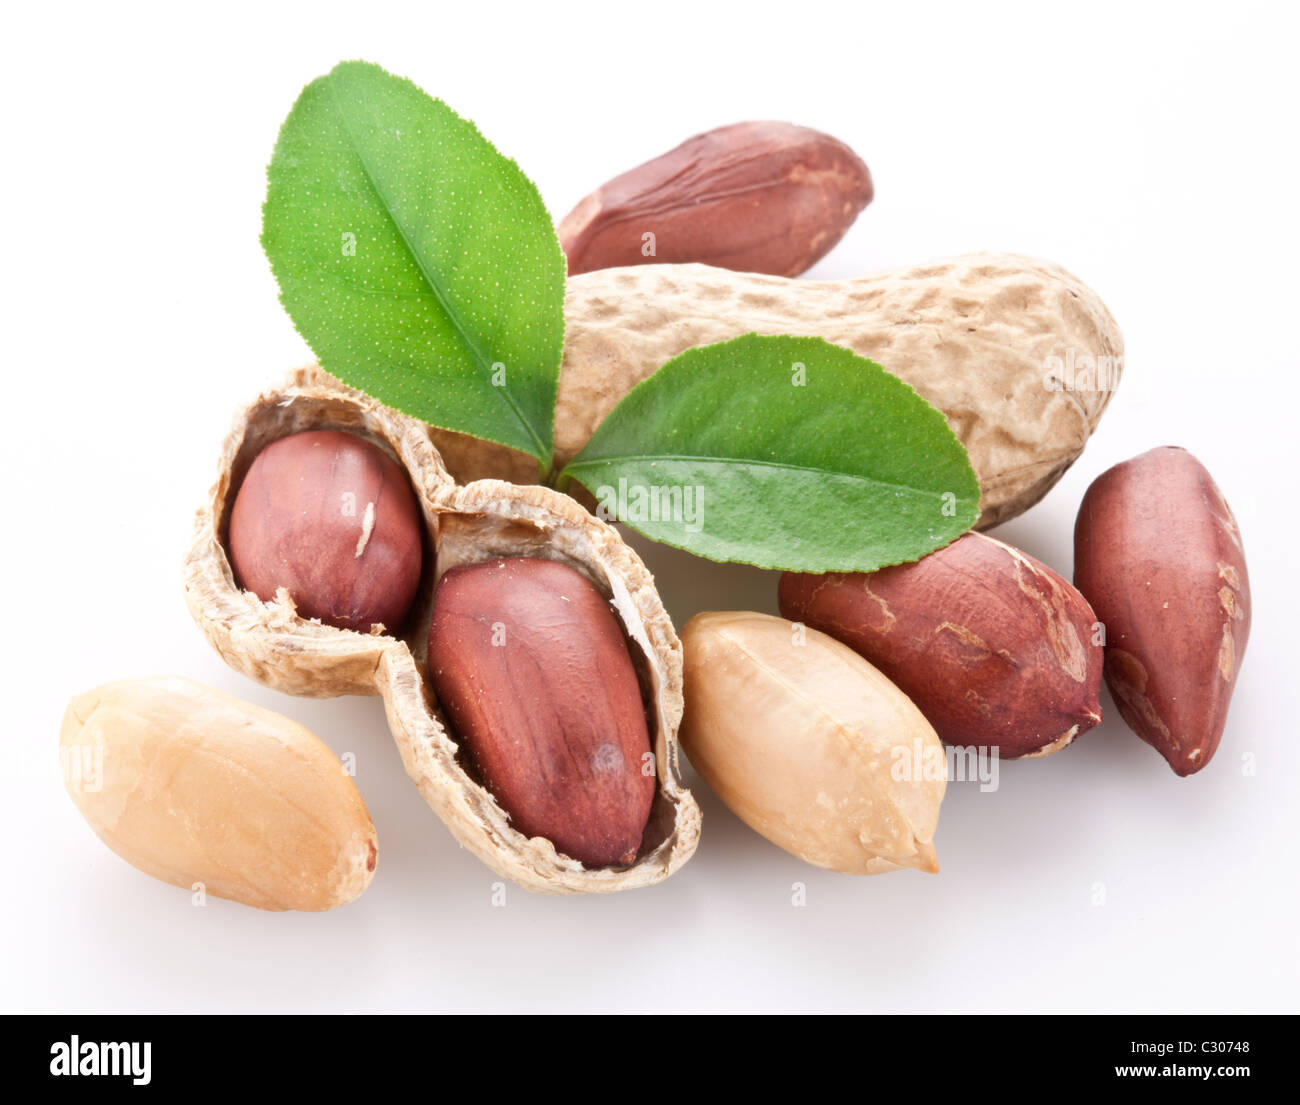 Peanuts. Isolated on a white background. Stock Photo